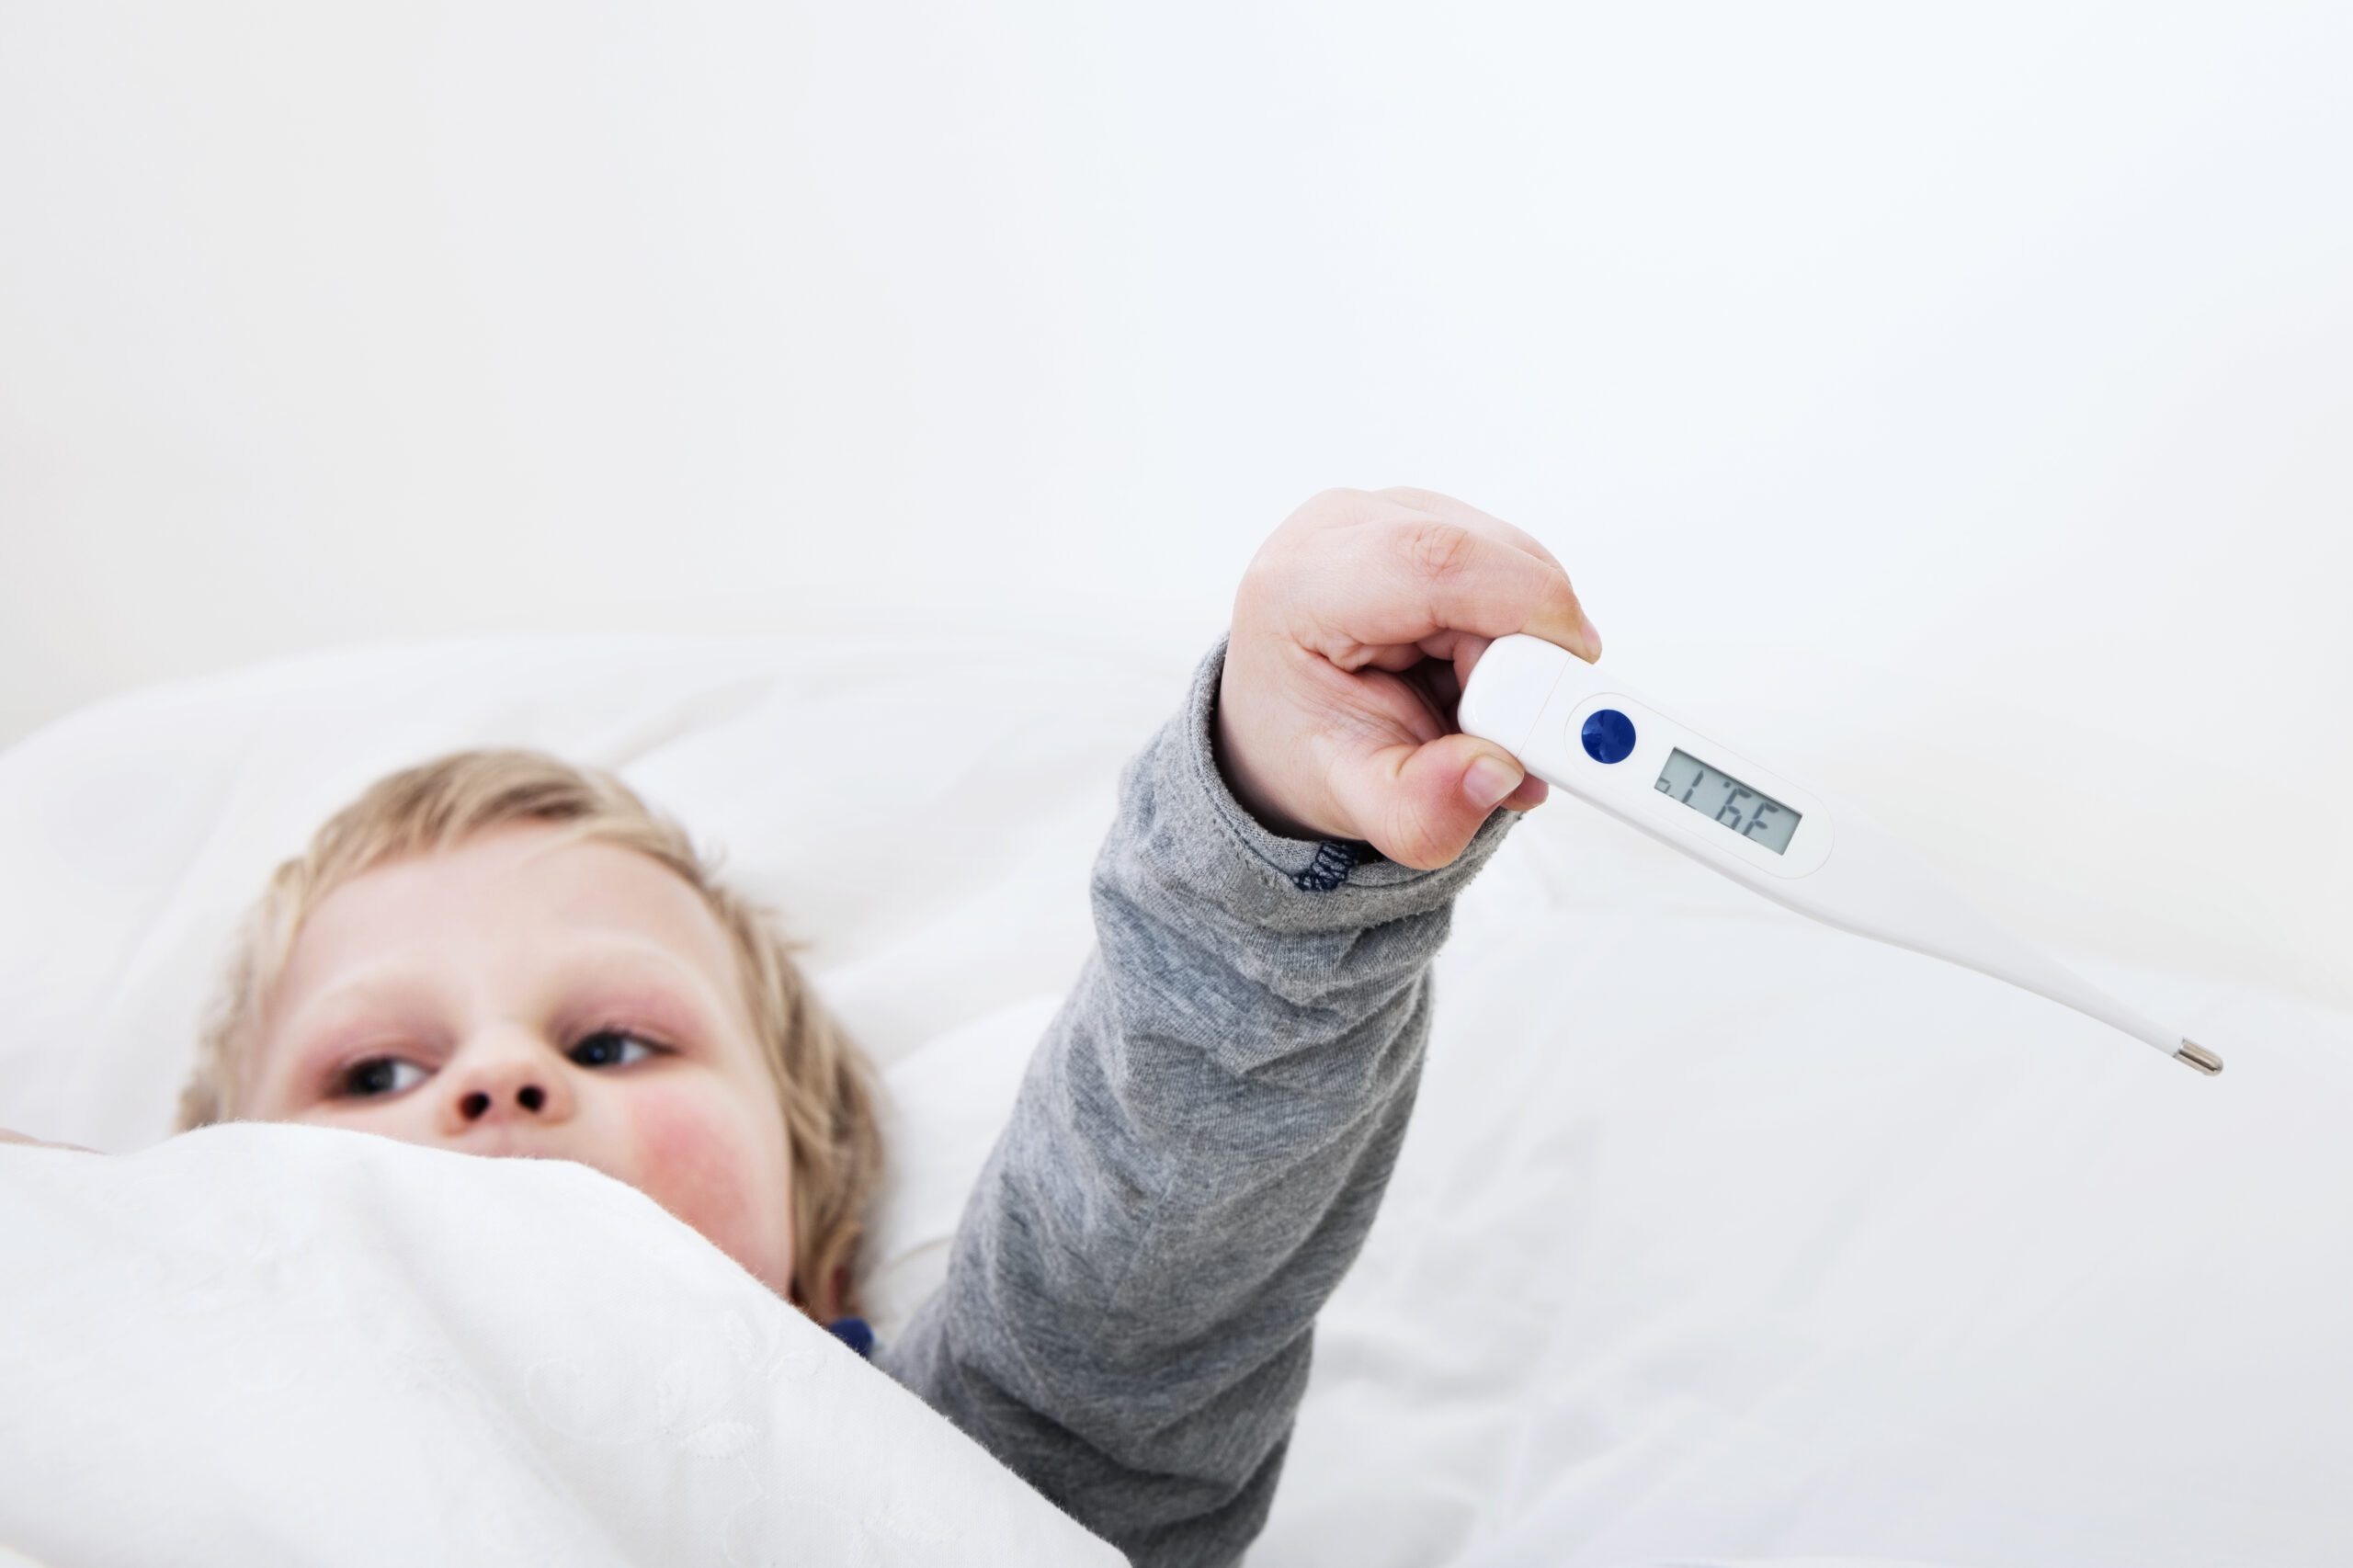 Fever has a mind of its own, scientists say